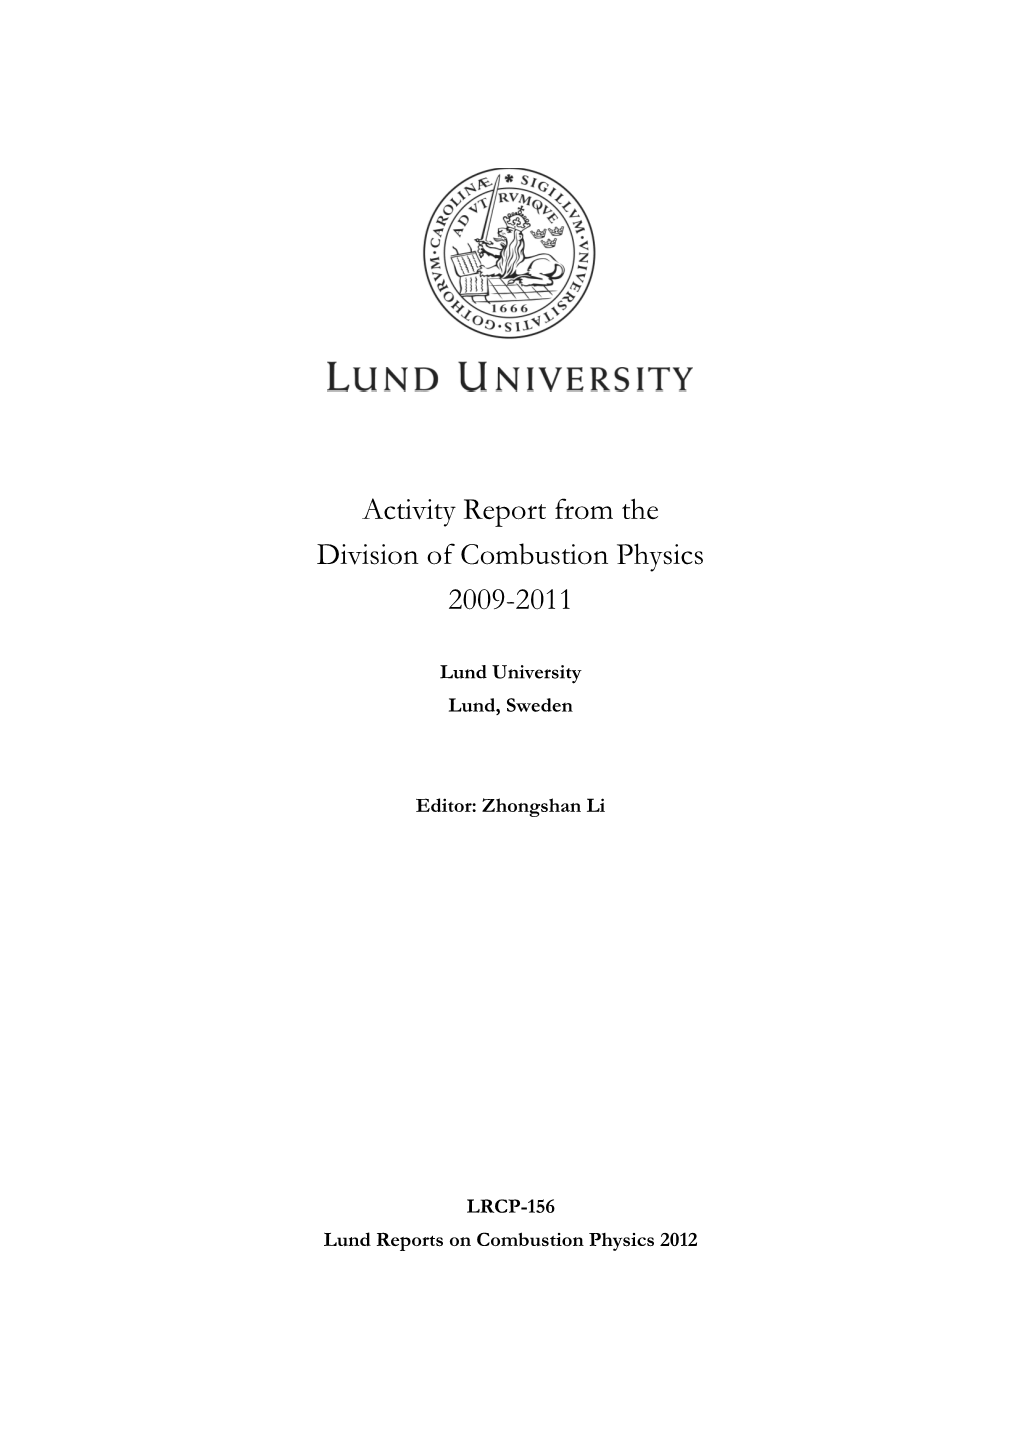 Activity Report from the Division of Combustion Physics 2009-2011